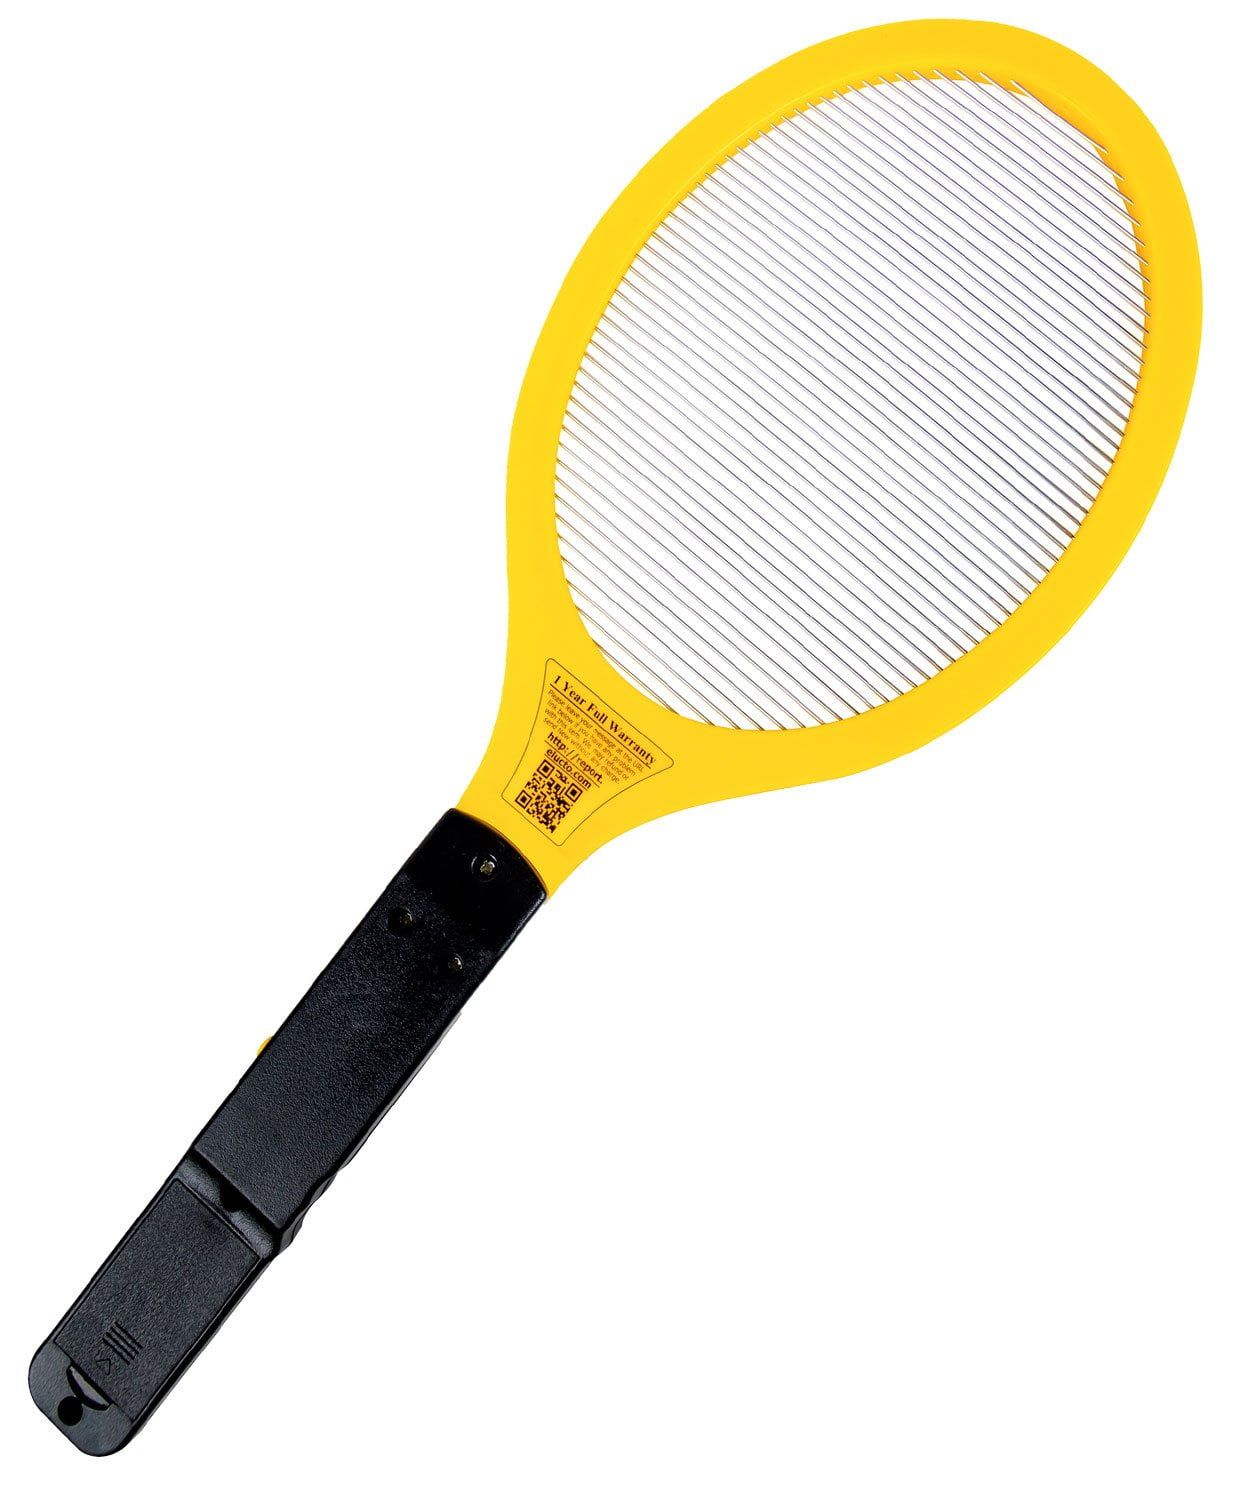 Z FD983 Bug Insect Fly Pest Mosquito Swatter Racket Handle Killer ~Random 1pc~: 